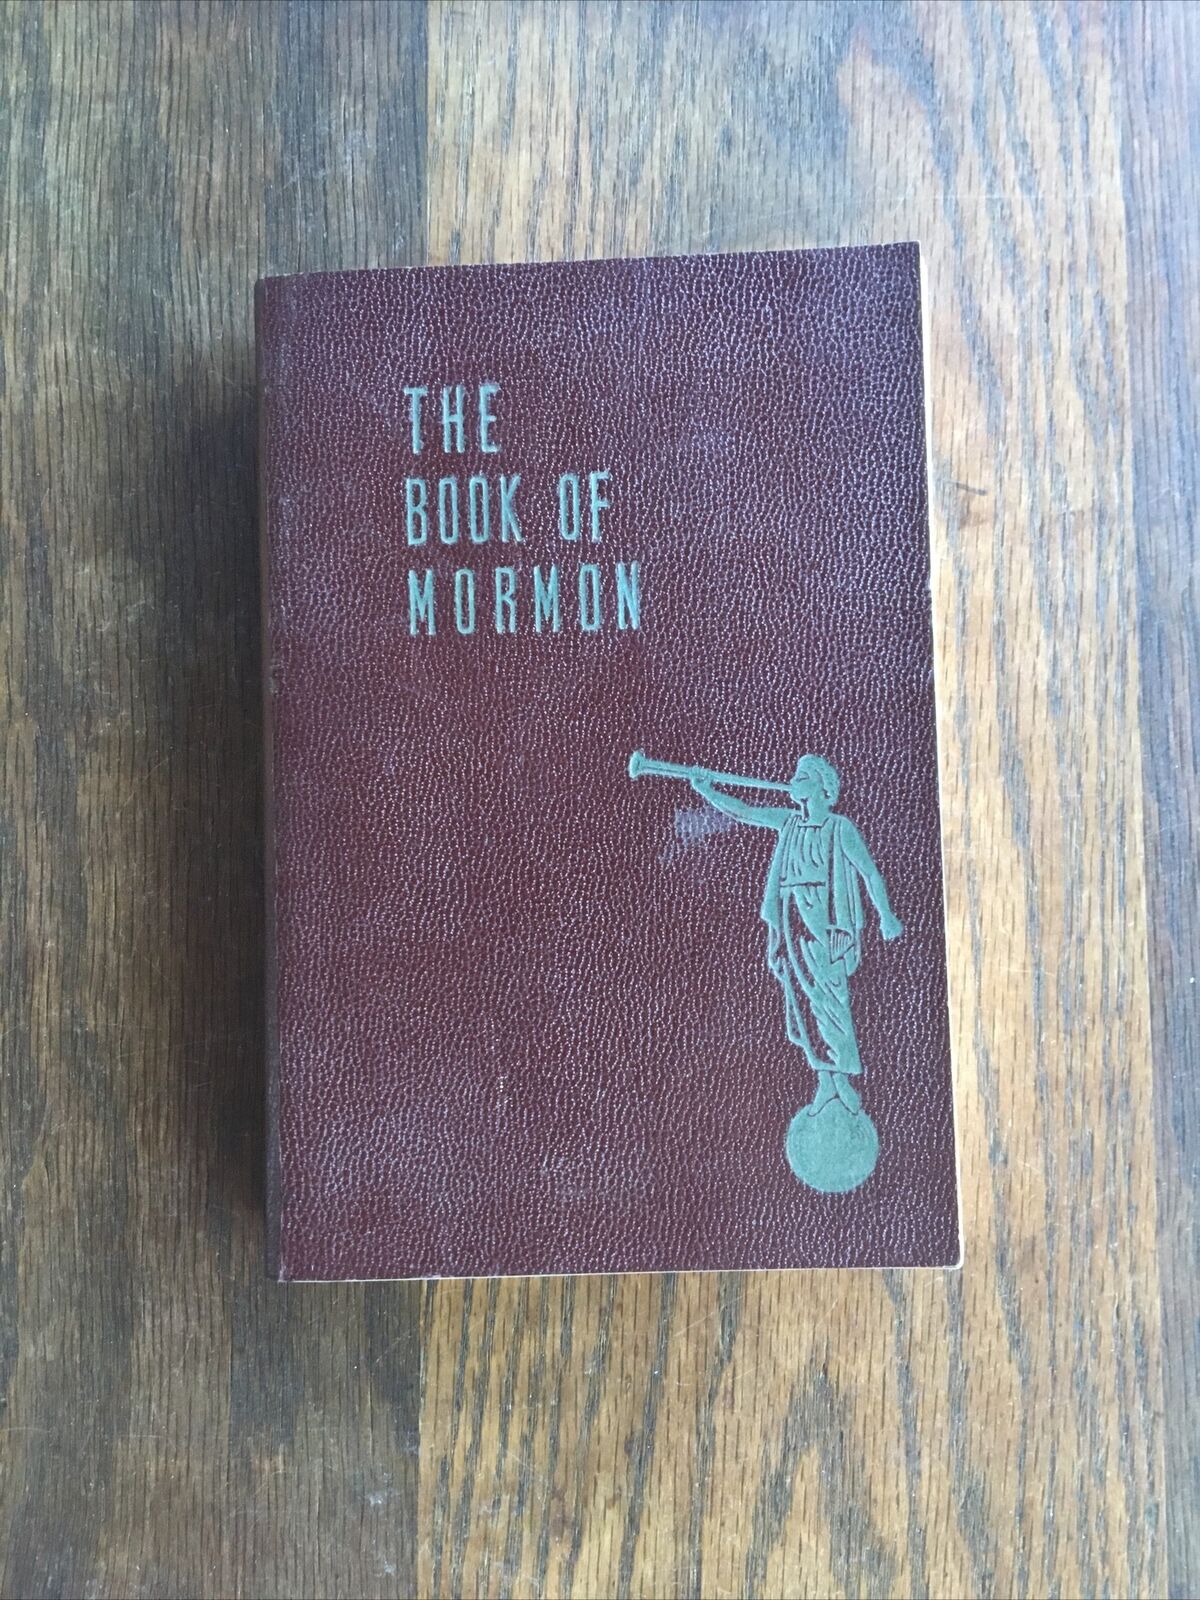 The Book of Mormon 1950 Black Soft Cover Church of Latter Day Saints 1950 Print